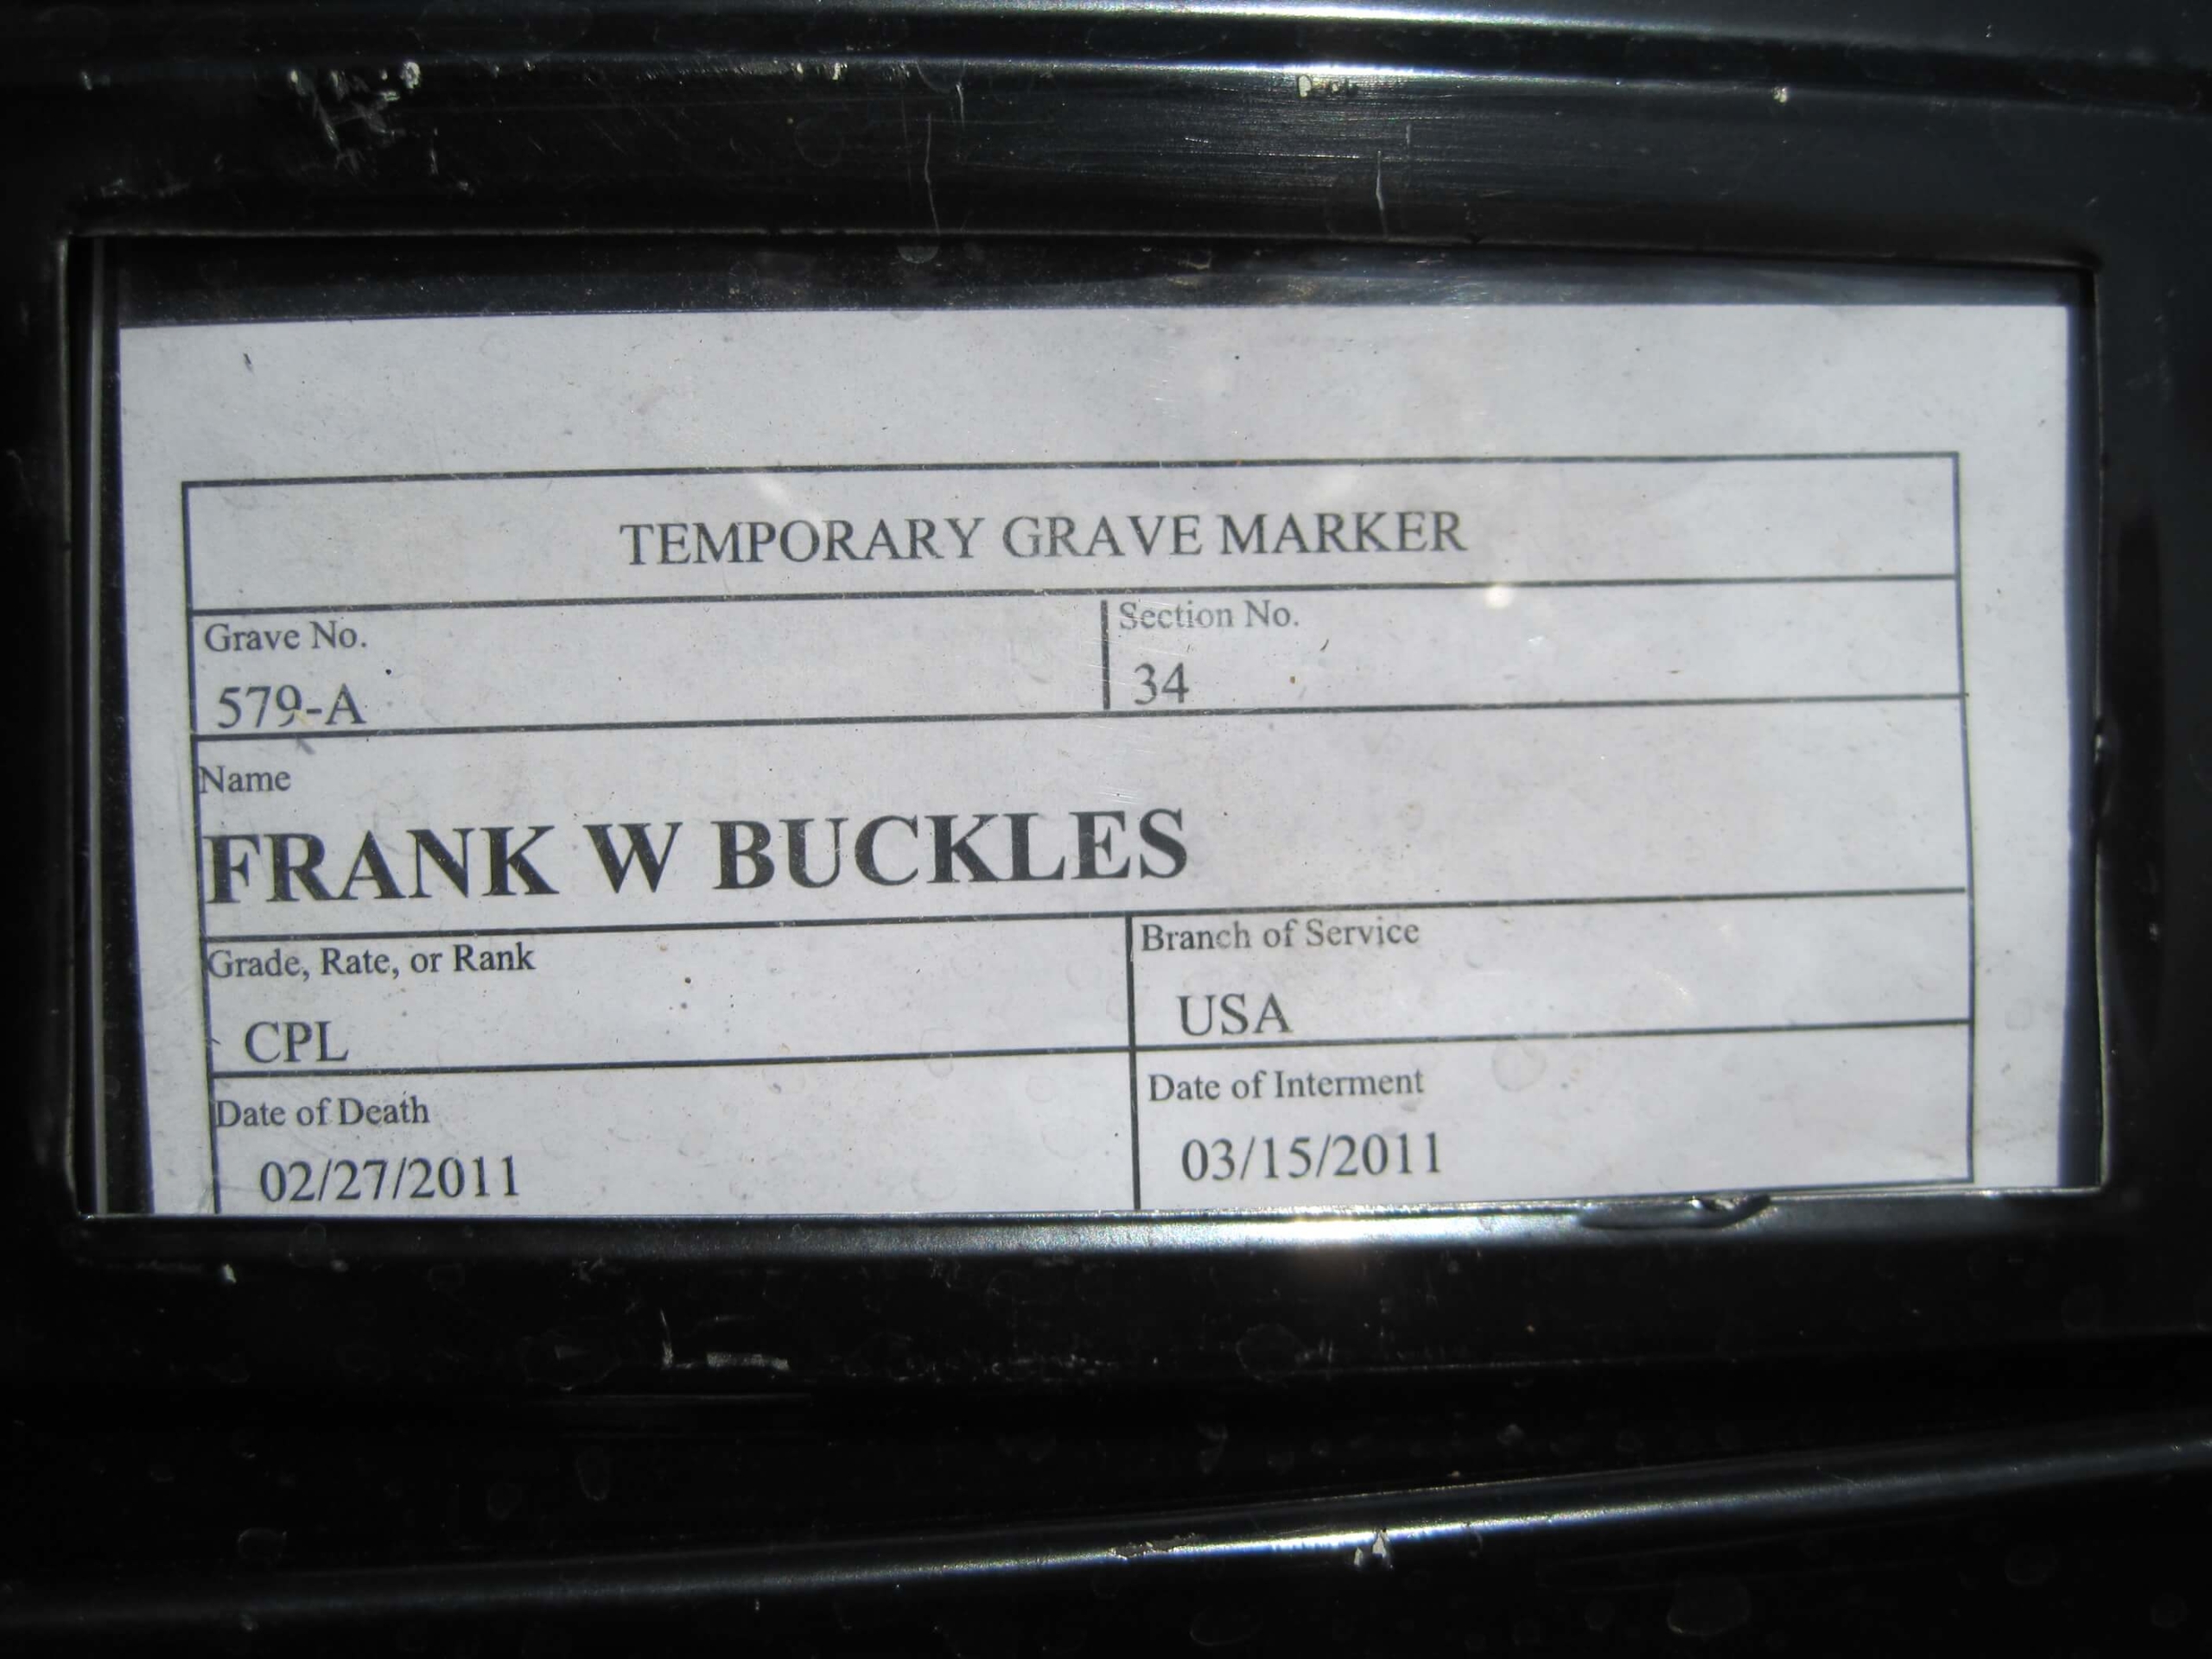 fwbuckles-gravesite-photo-by-eileen-horan-march-2011-002